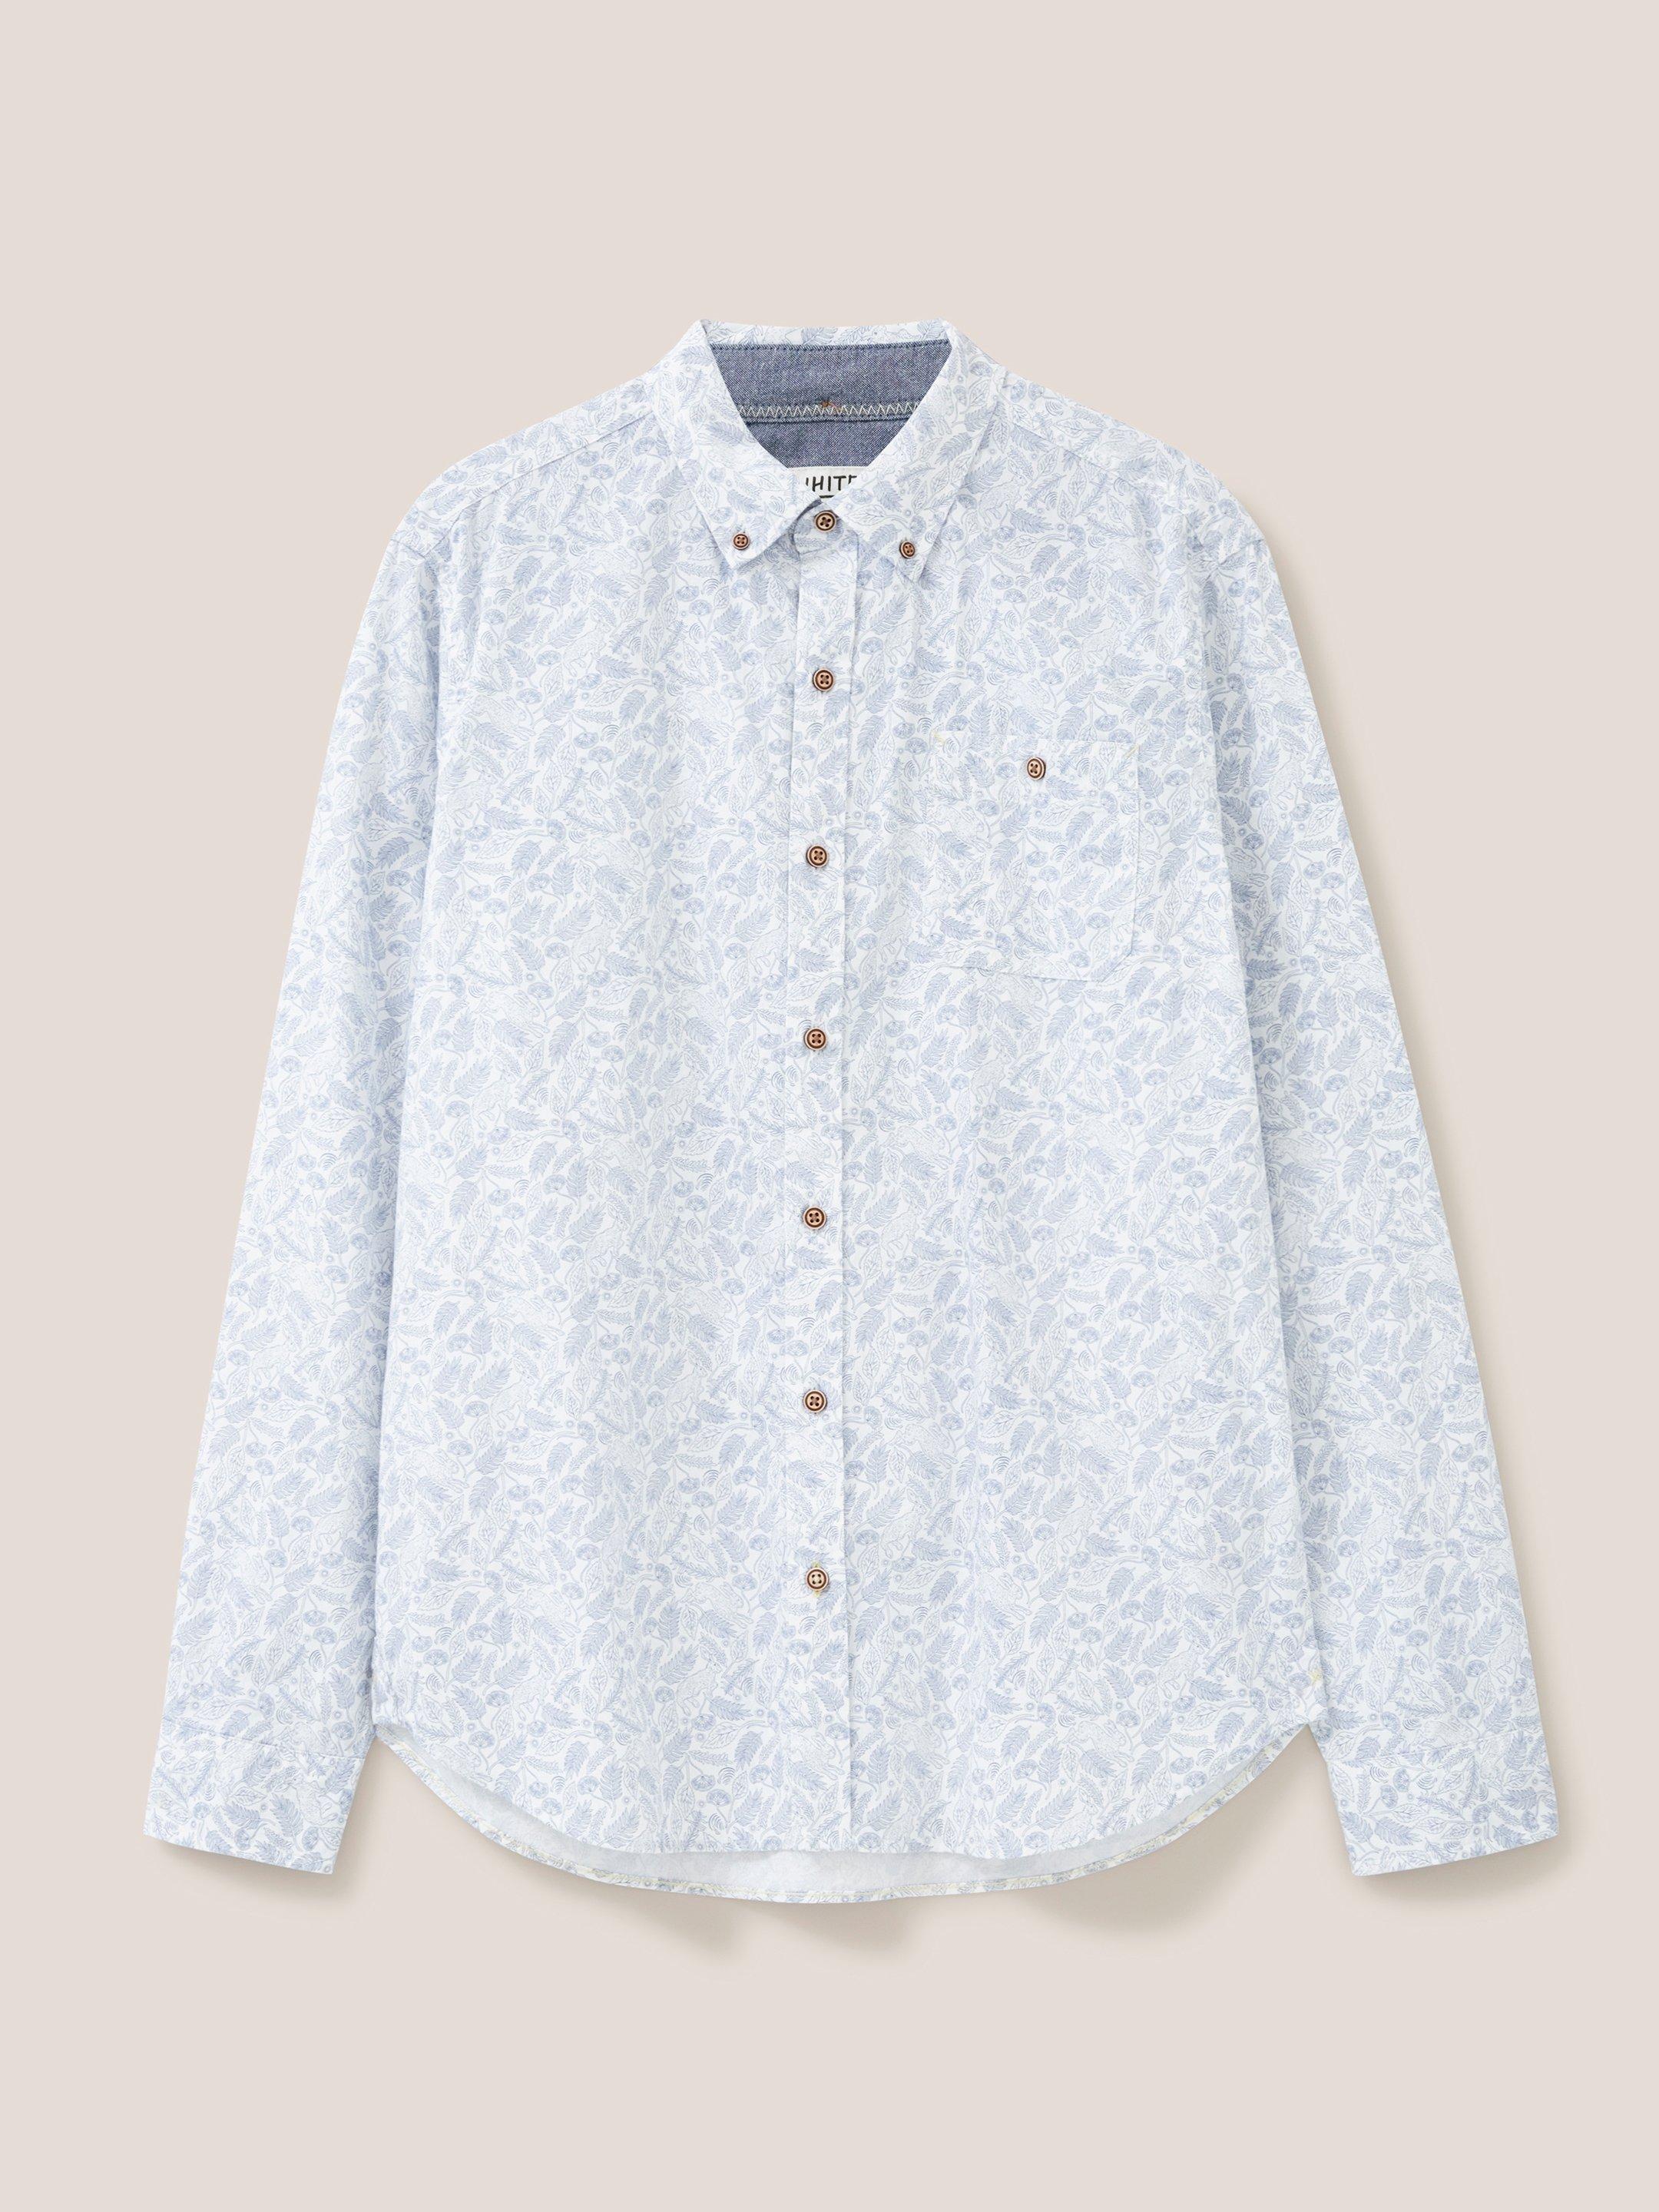 Hare Print Shirt in WHITE MLT - FLAT FRONT